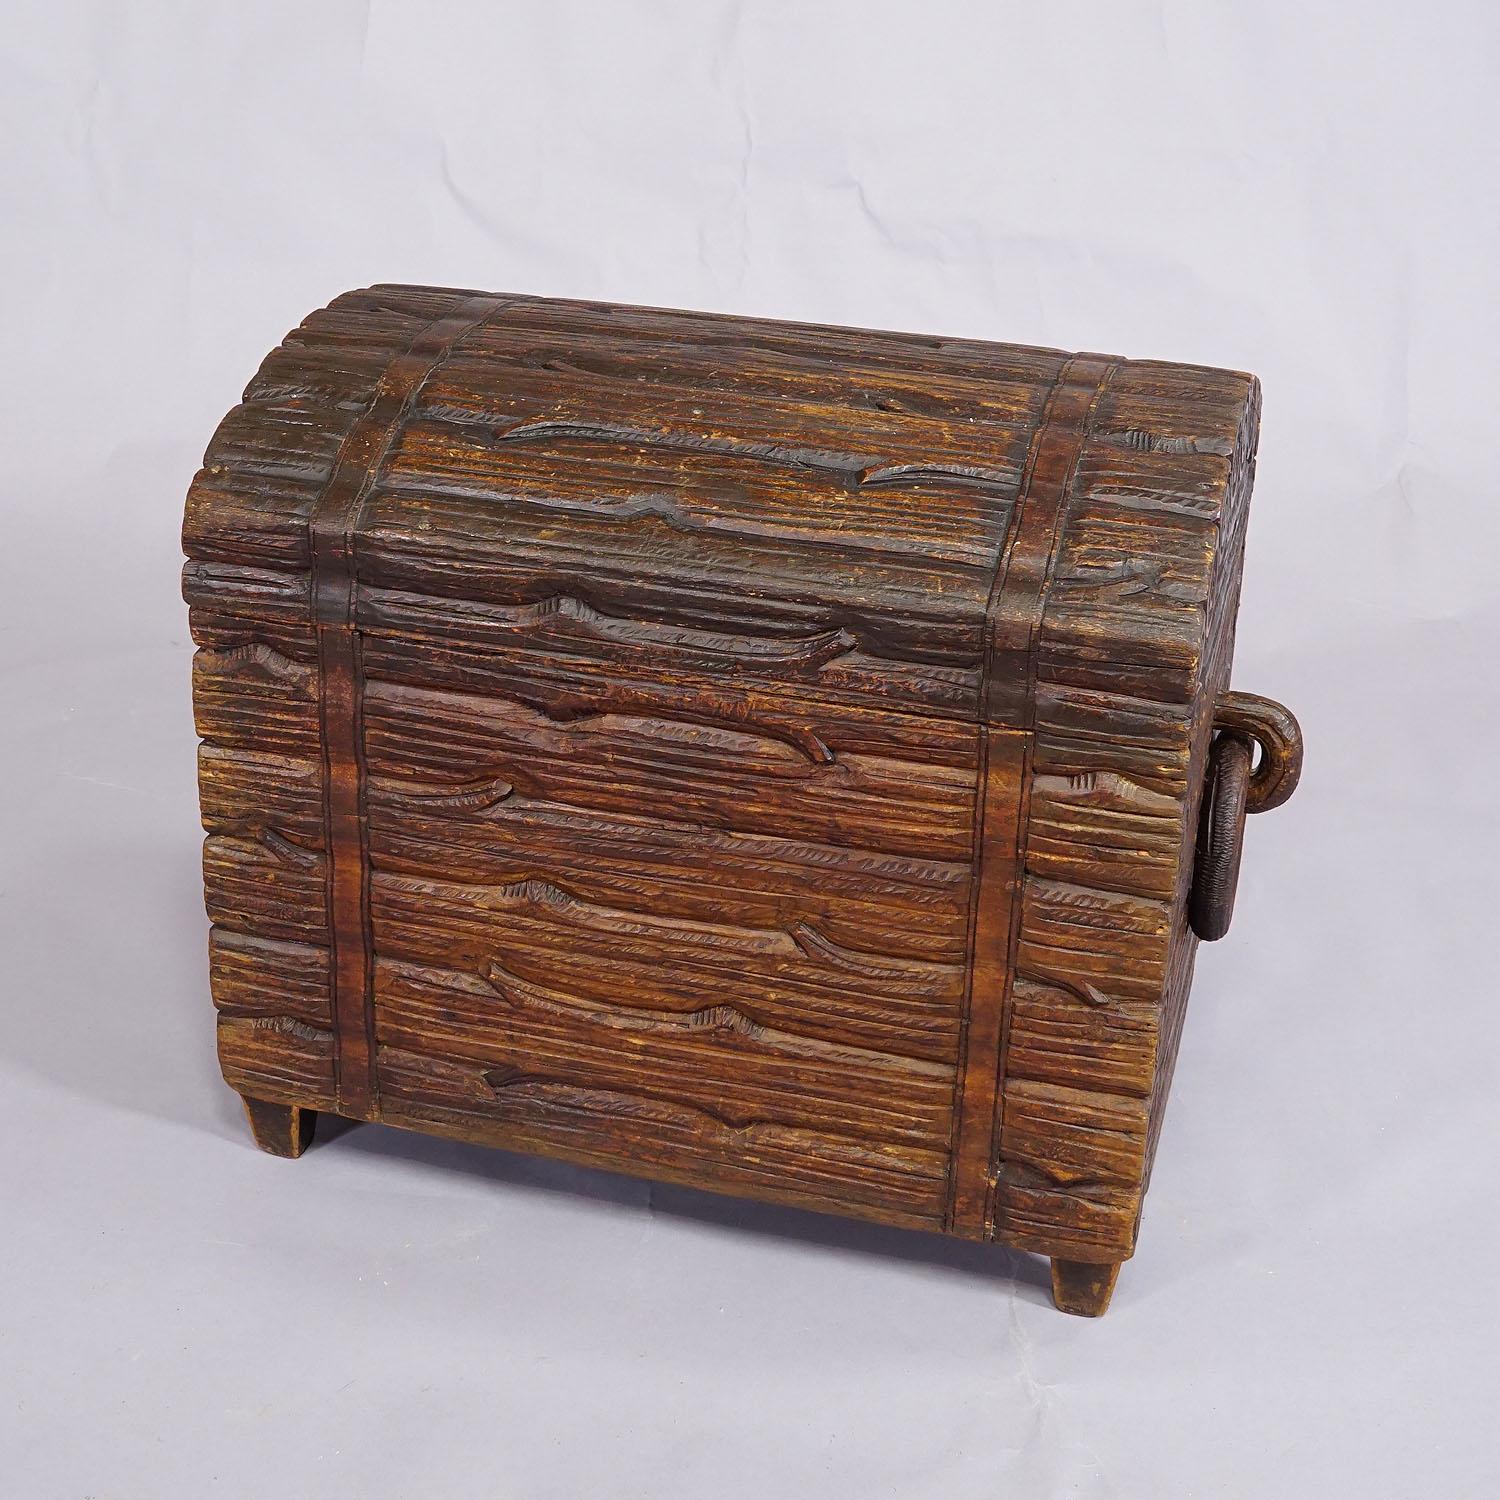 Victorian Wooden Carved Black Forest Log Box Modelled as Piled Stack of Logs For Sale